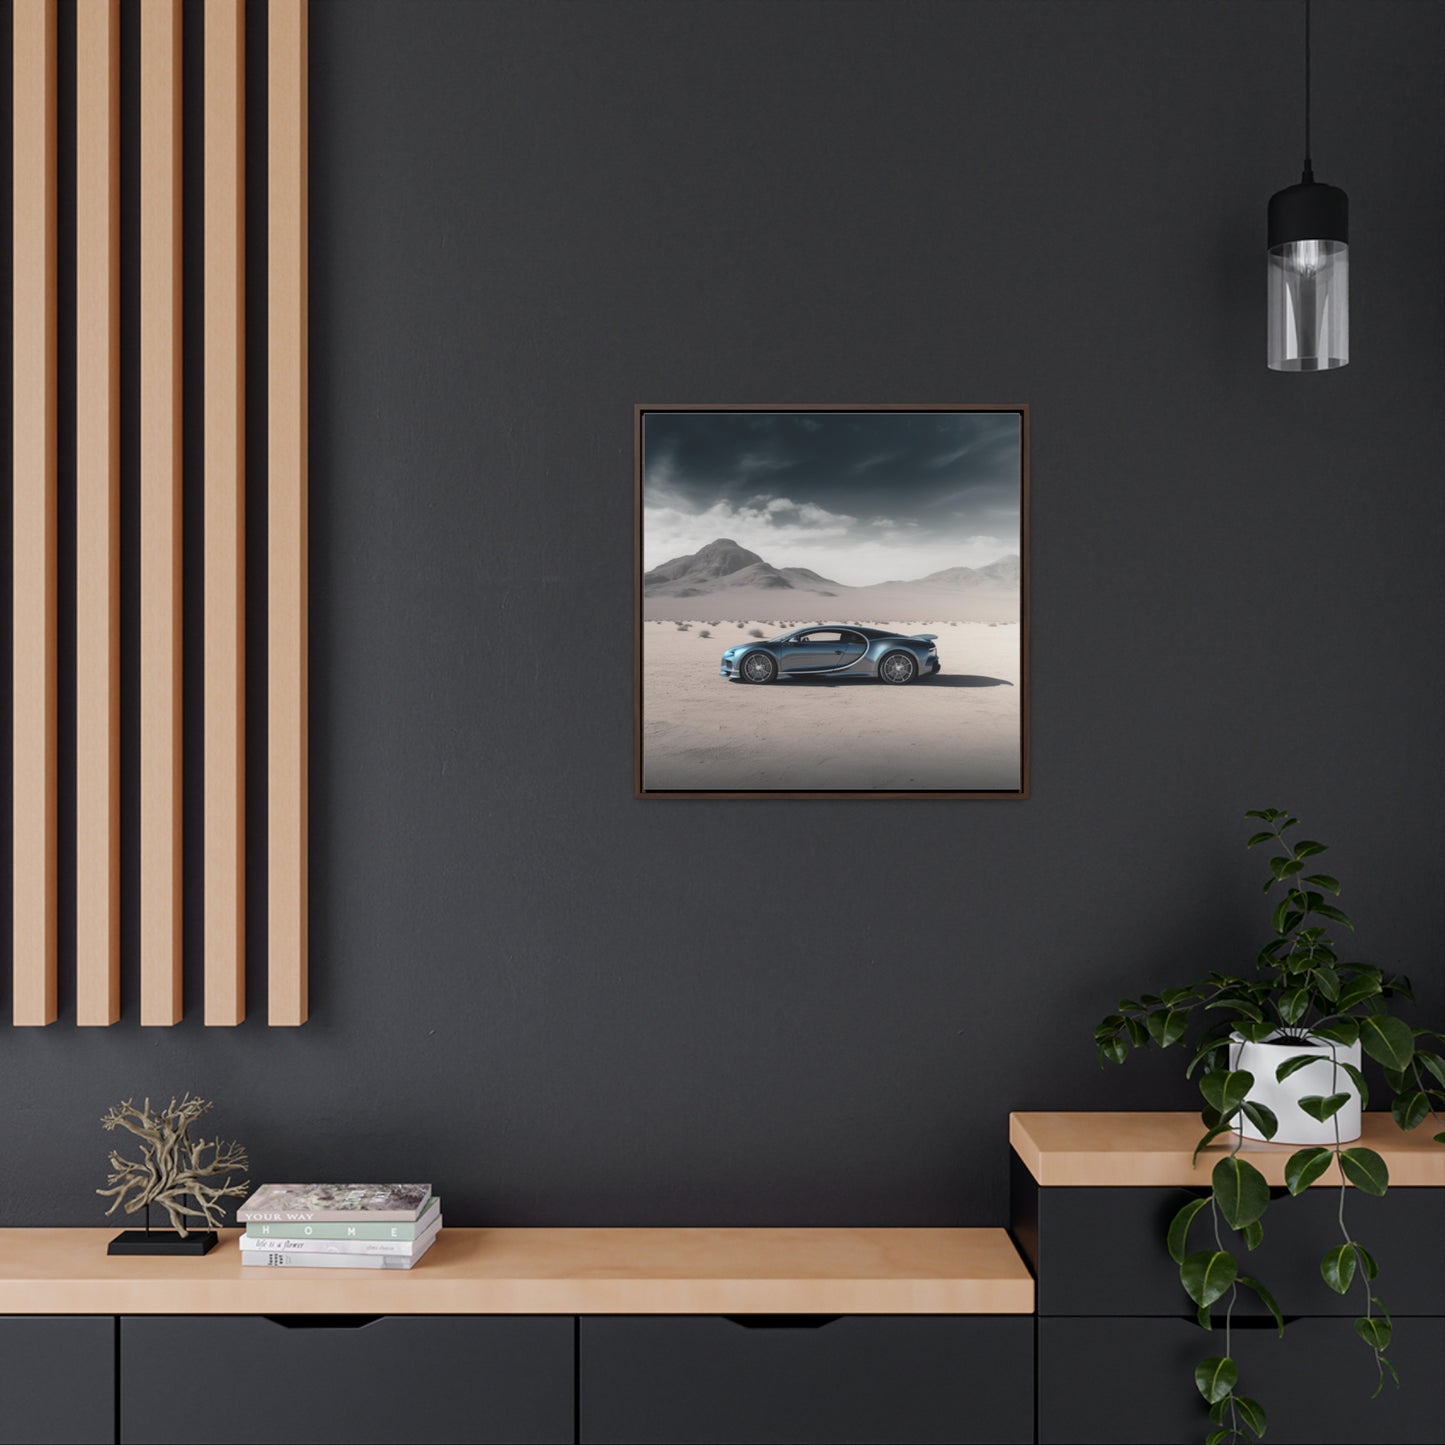 Gallery Canvas Wraps, Square Frame Bugatti Real Look 1